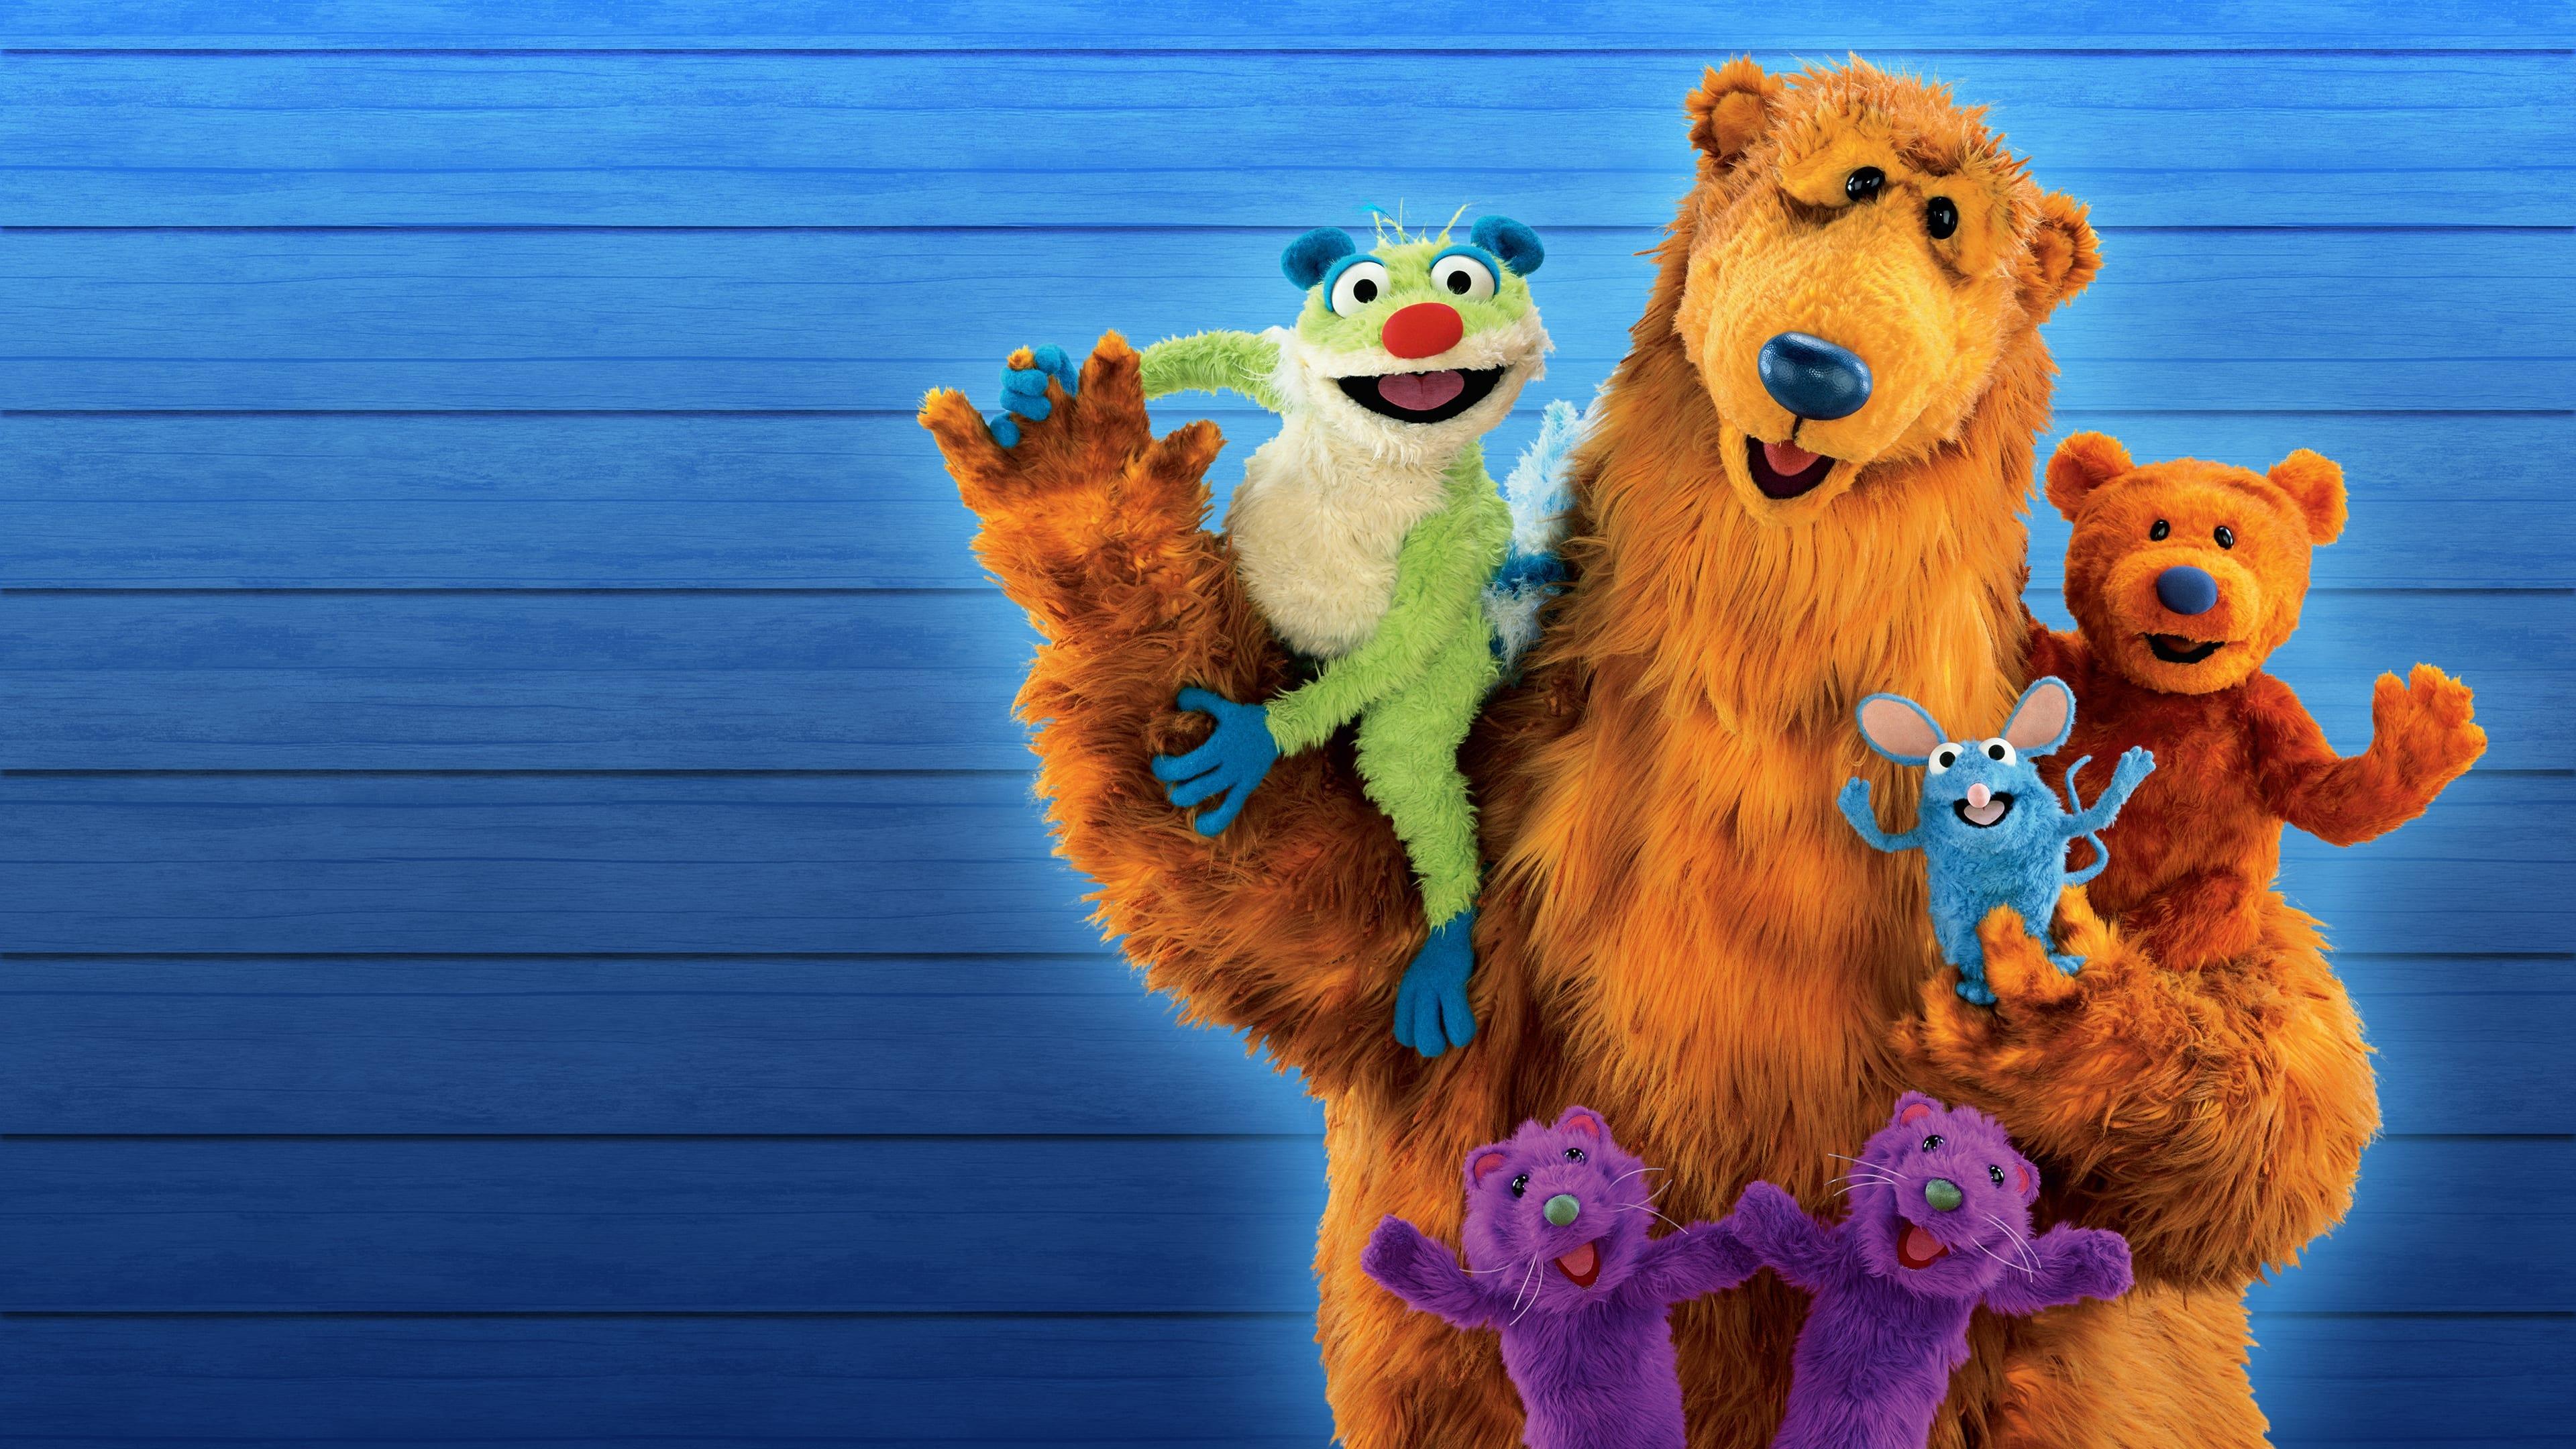 Bear in the Big Blue House backdrop